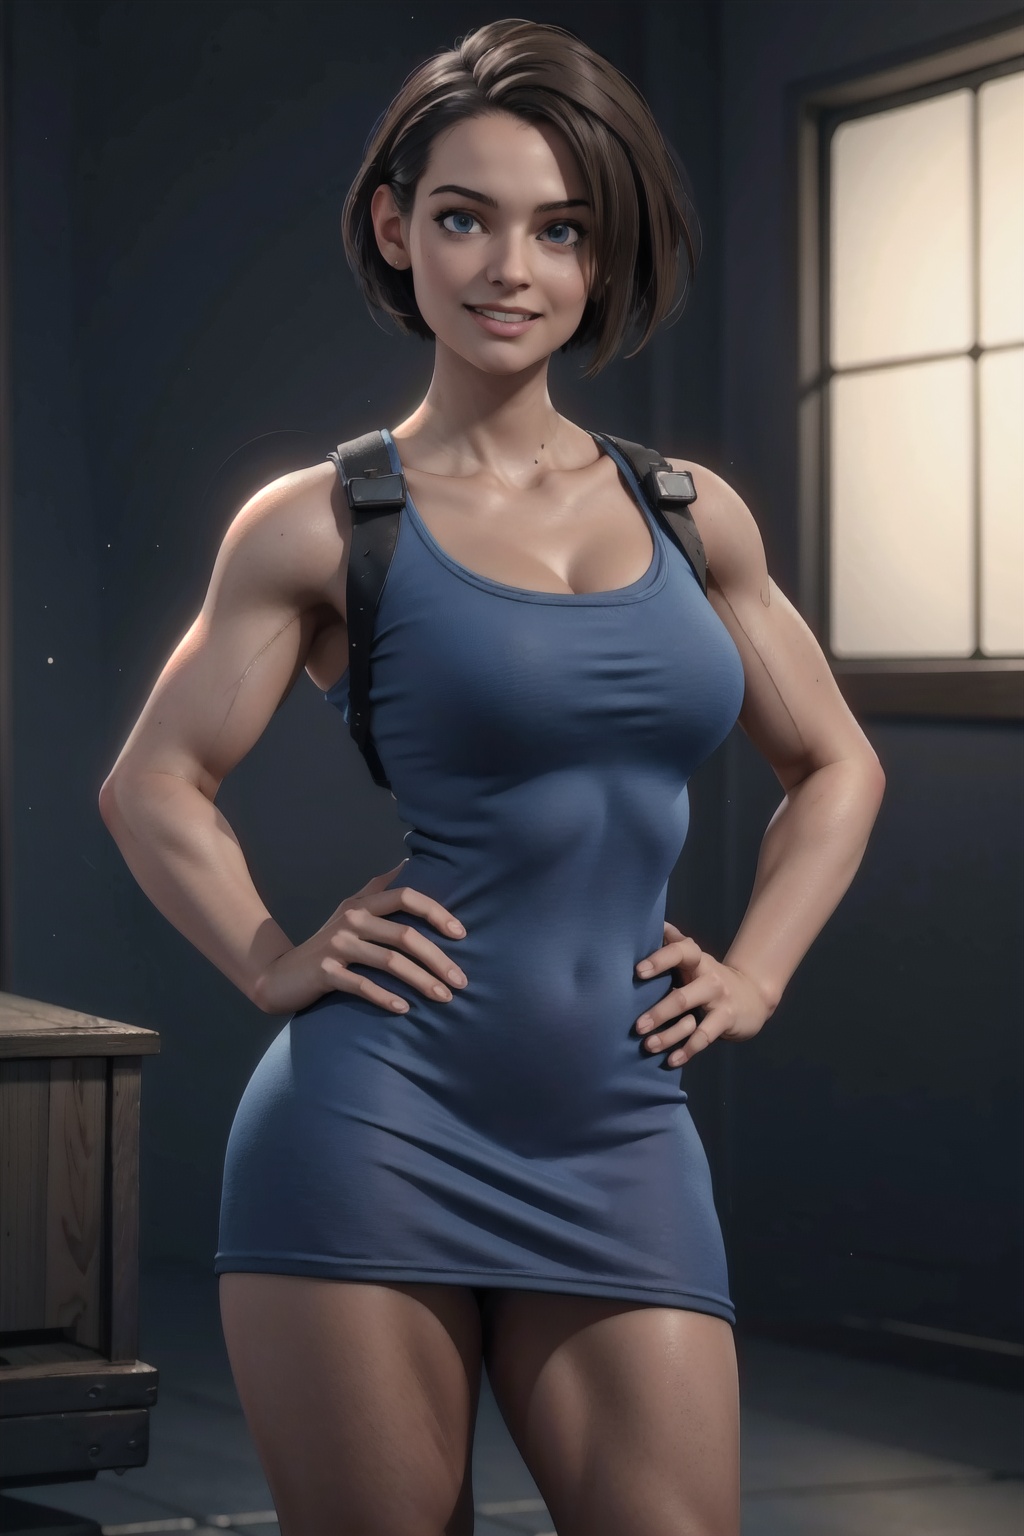 chester malester recommends jill valentine sexy pic